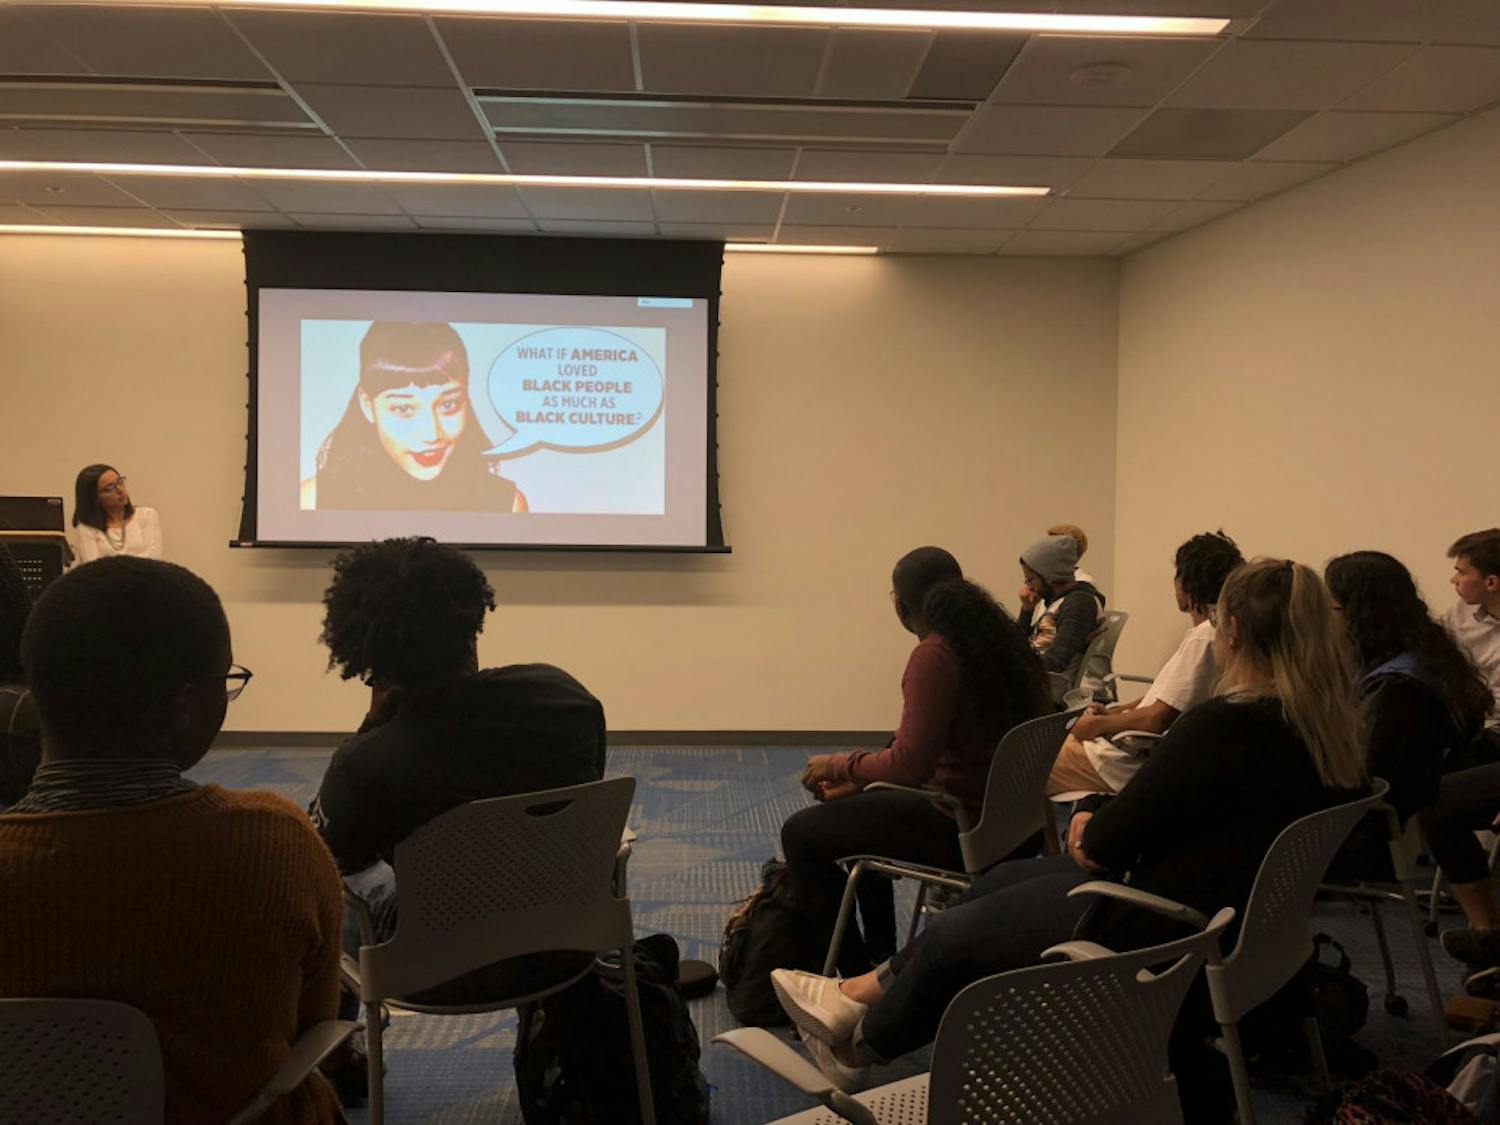 Diana Moreno, the assistant director of the UF Multicultural and Diversity Affairs, discusses the fine line between cultural appropriation and appreciation with students at a discussion held as part of Anti-Racism week.
&nbsp;